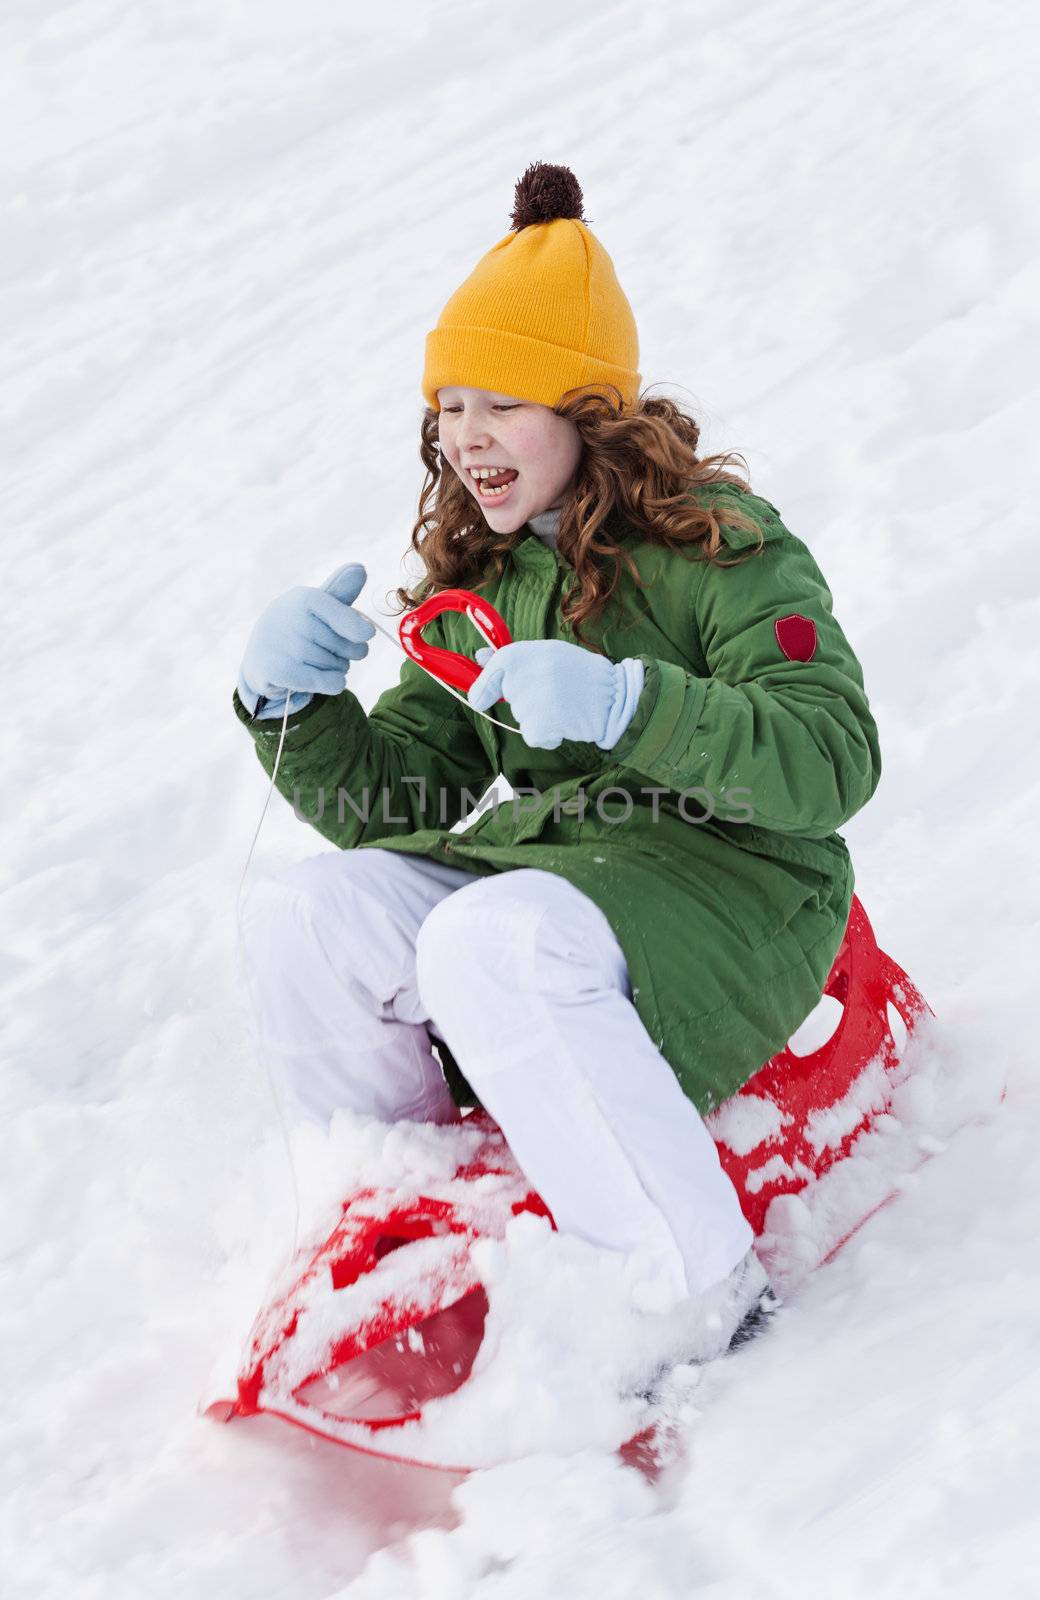 Girl slides down hill on red plastic sledge in a snowy winter park